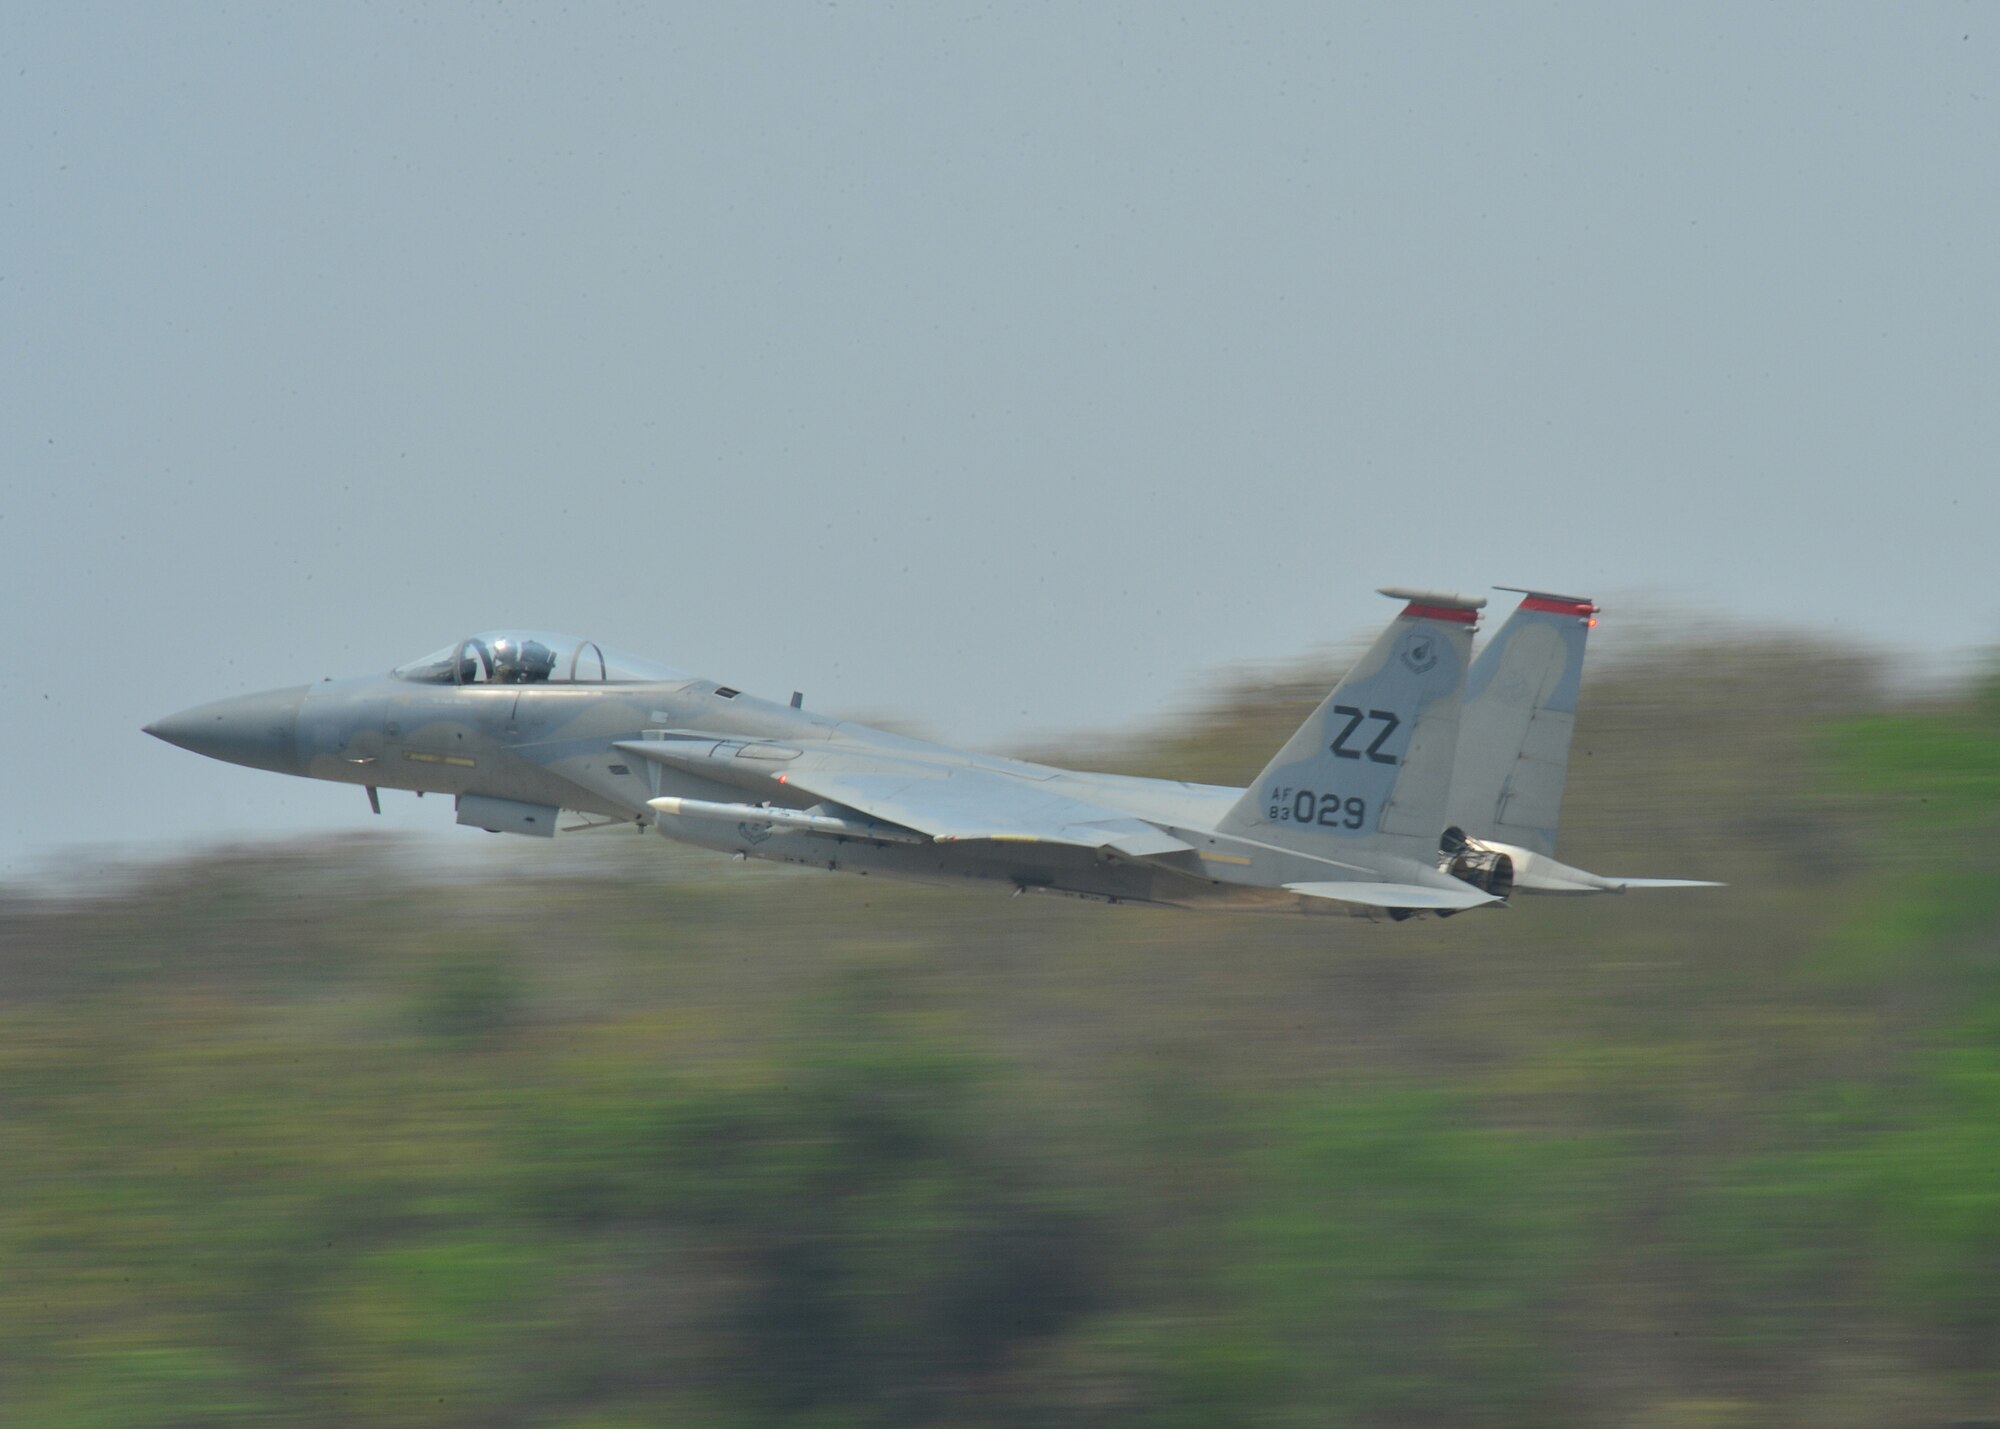 An F-15 Eagle, from 67th Fight Squadron, Kadena Air Base, Japan, takes off during Exercise Cope Tiger 16, on Korat Royal Thai Air Force Base, Thailand, March 7, 2016. Exercise Cope Tiger 16 includes over 1,200 personnel from three countries and continues the growth of strong, interoperable and beneficial relationships within the Asia-Pacific Region, while demonstrating U.S. capability to project forces strategically in a combined, joint environment. (U.S. Air Force Photo by Tech Sgt. Aaron Oelrich/Released)